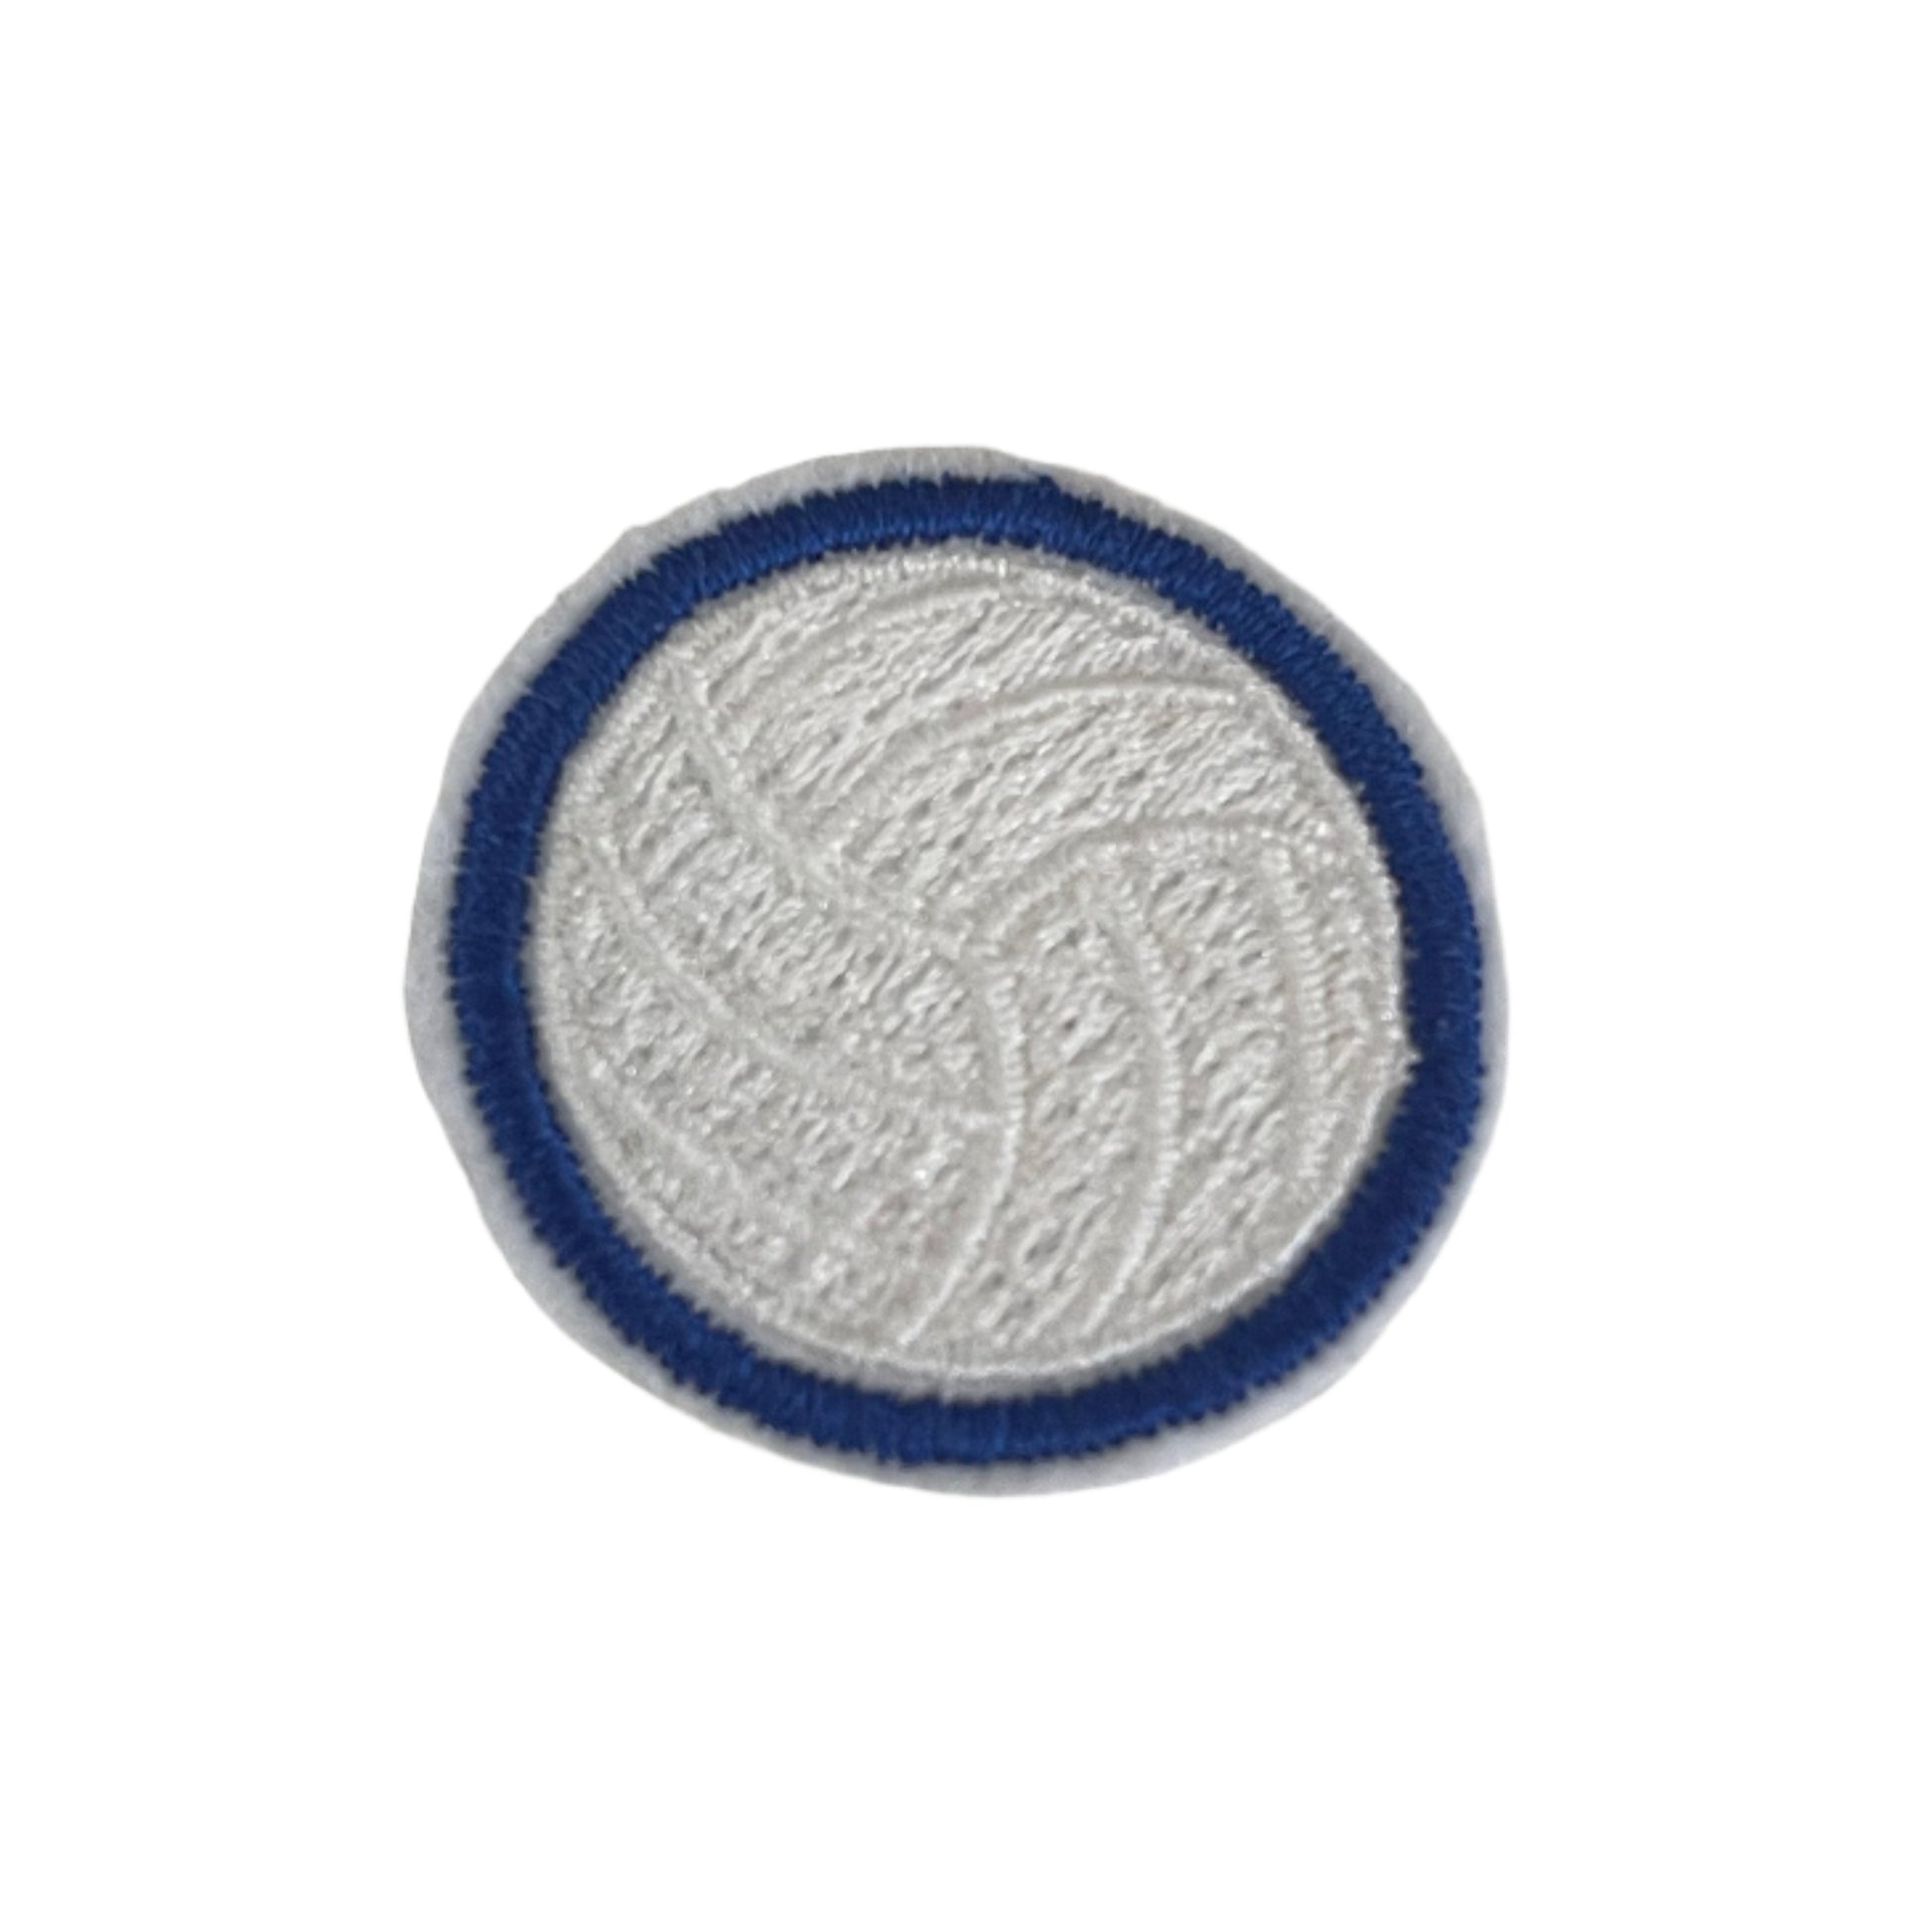 Close-up of a blue volleyball embroidered patch with white and blue detailing, perfect for customizing hats and other accessories.